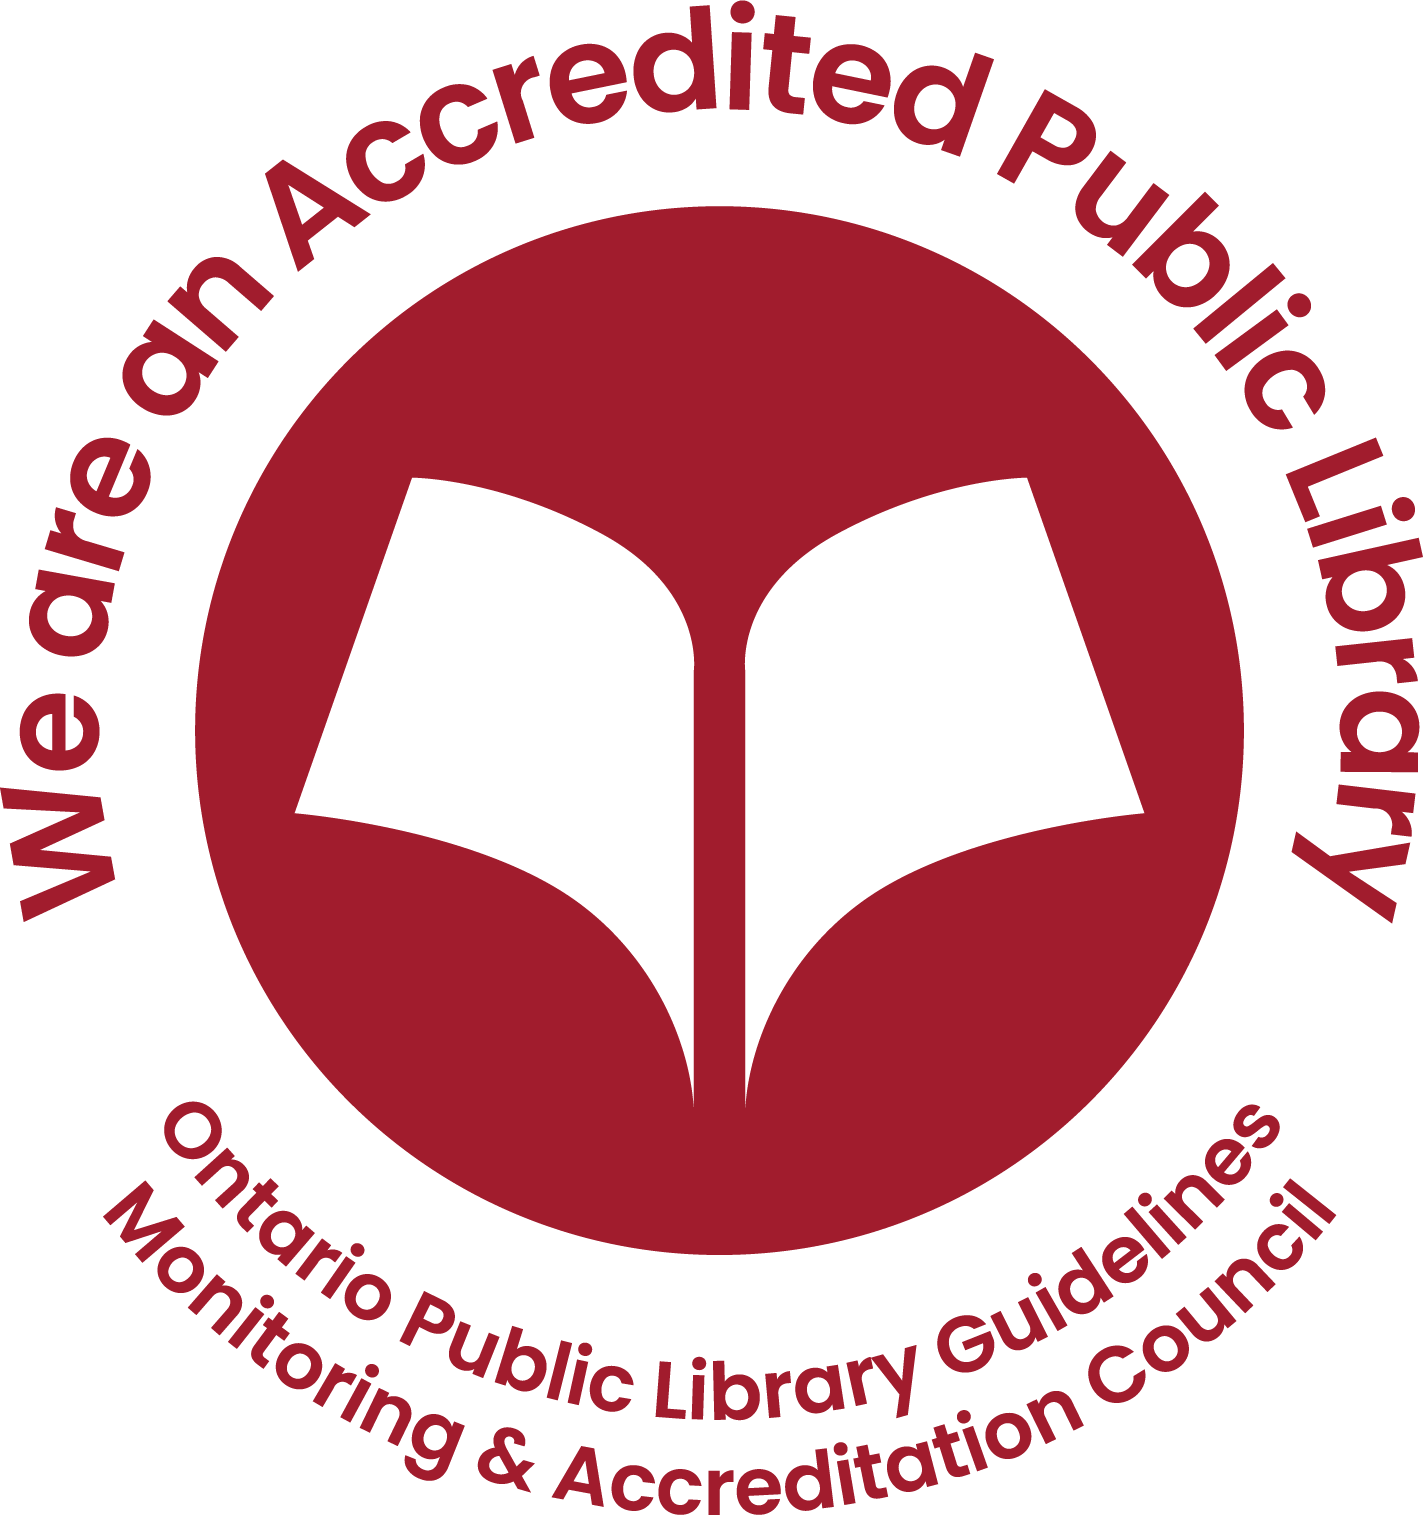 We are an accredited public library